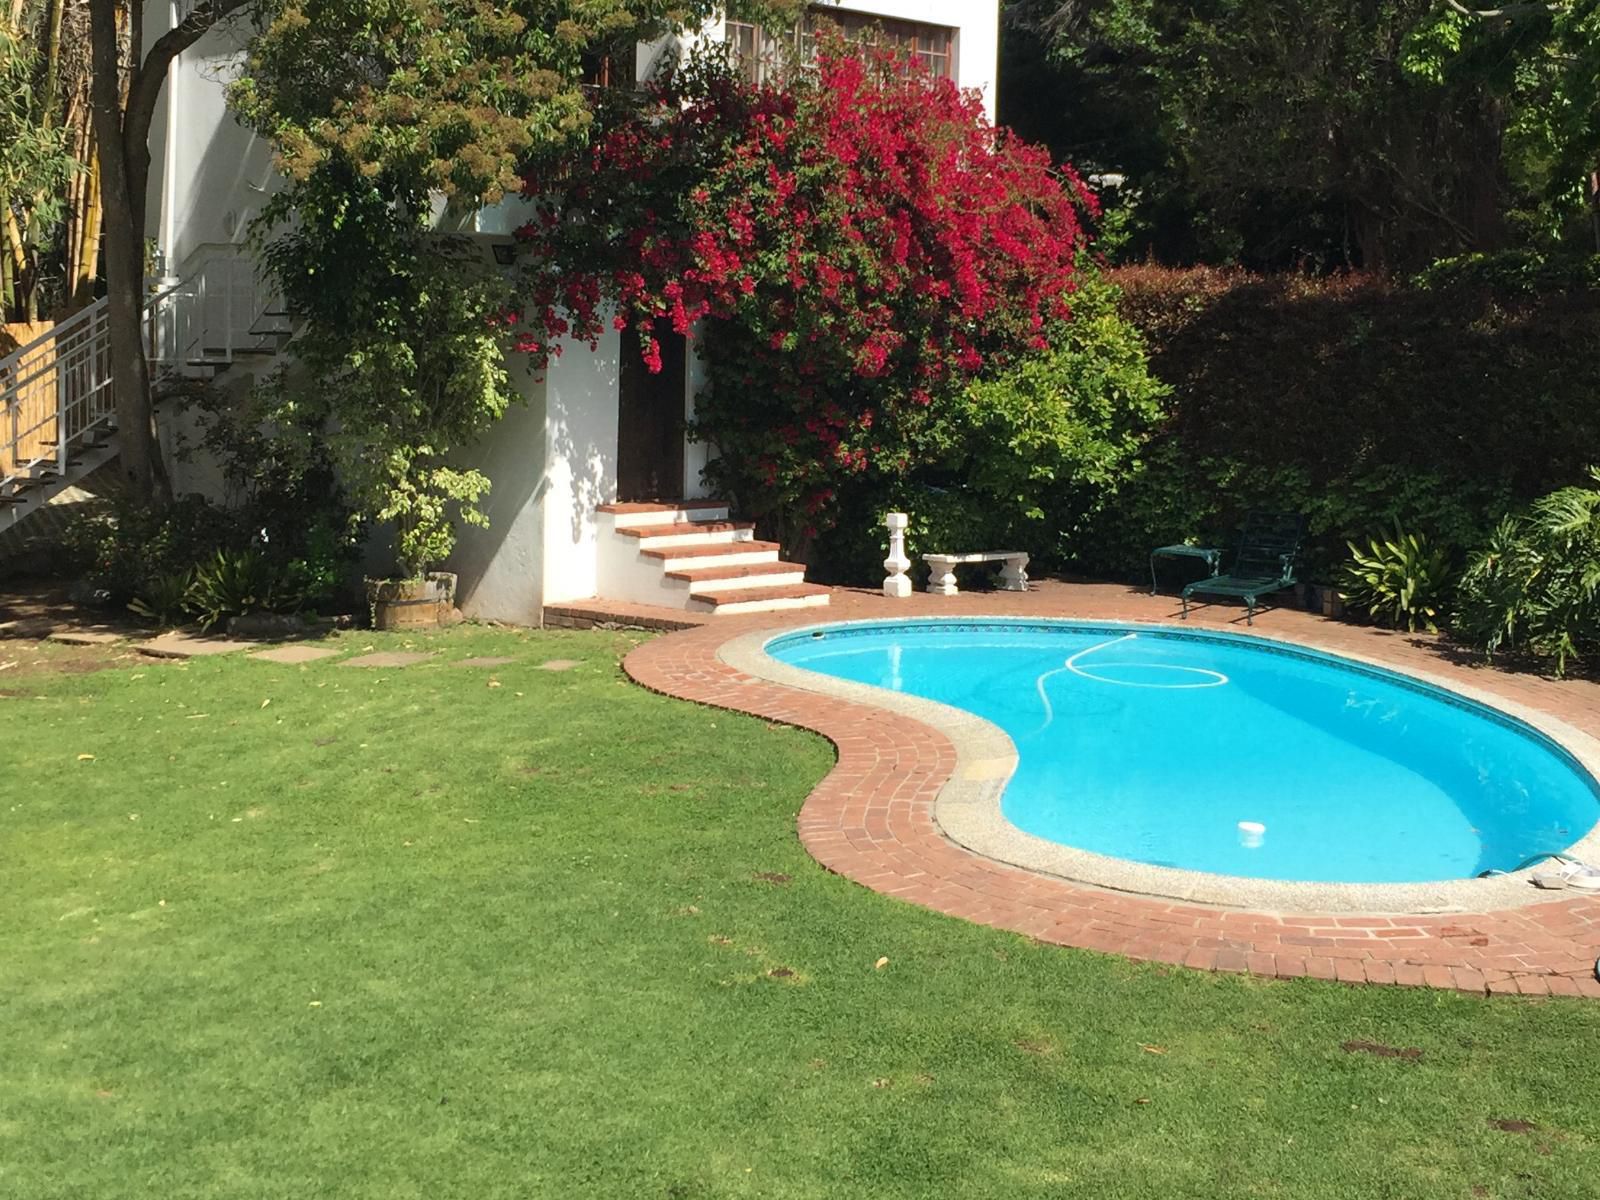 Hillingdale On Alexandra Wynberg Cape Town Western Cape South Africa House, Building, Architecture, Garden, Nature, Plant, Swimming Pool